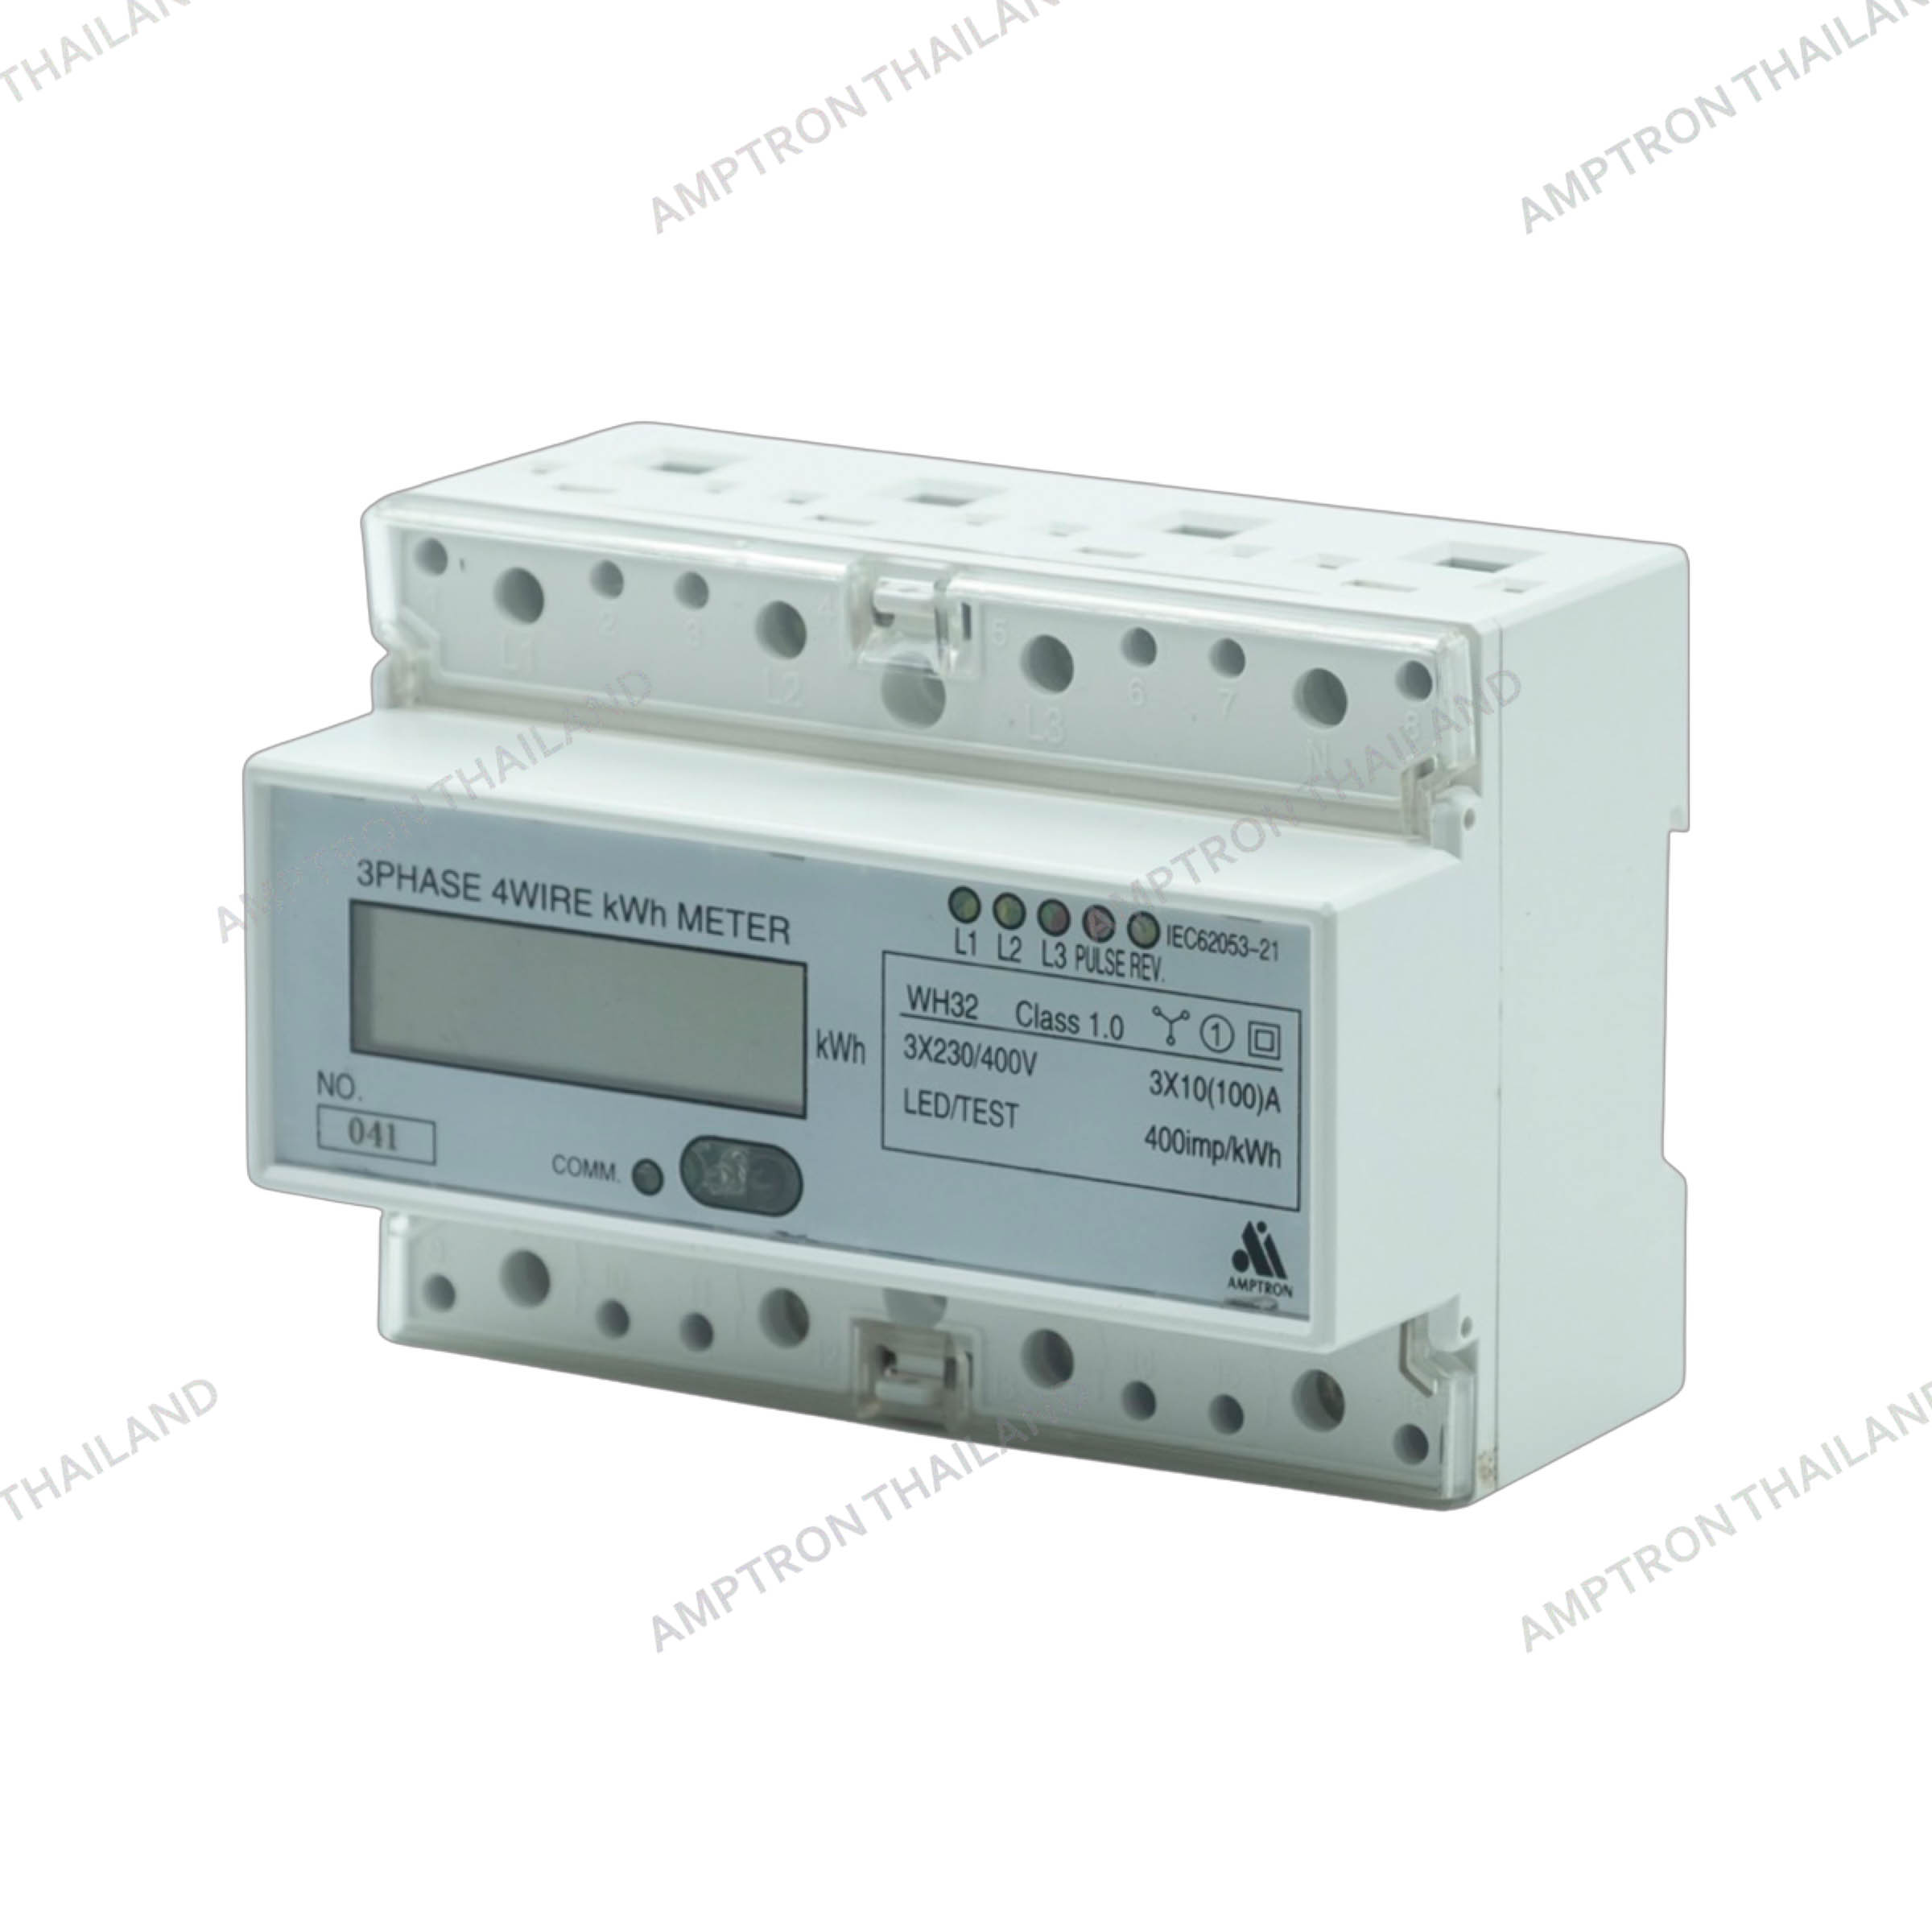 WH32 3Phase 4Wire Kwh Meter